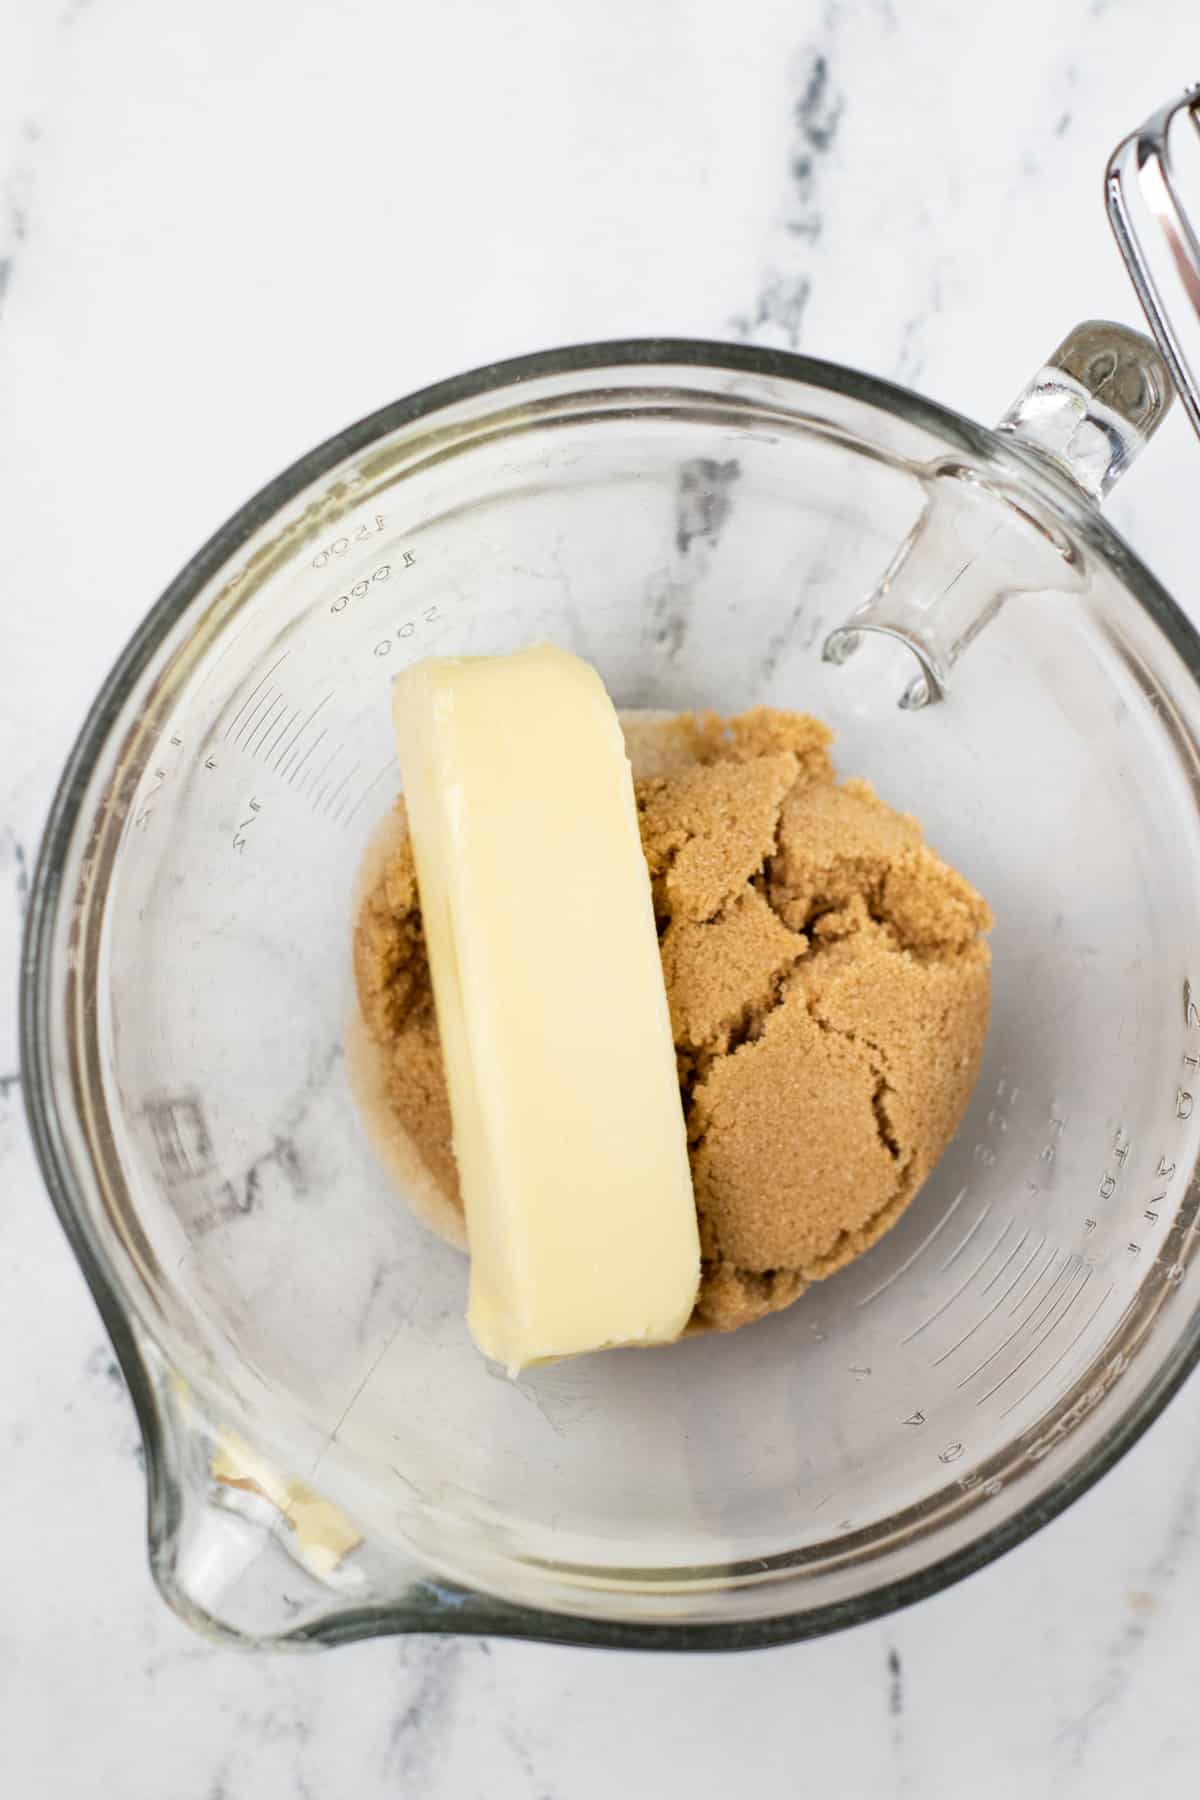 Mixing butter and sugar is one of the procedures in making Pumpkin Snickerdoodles